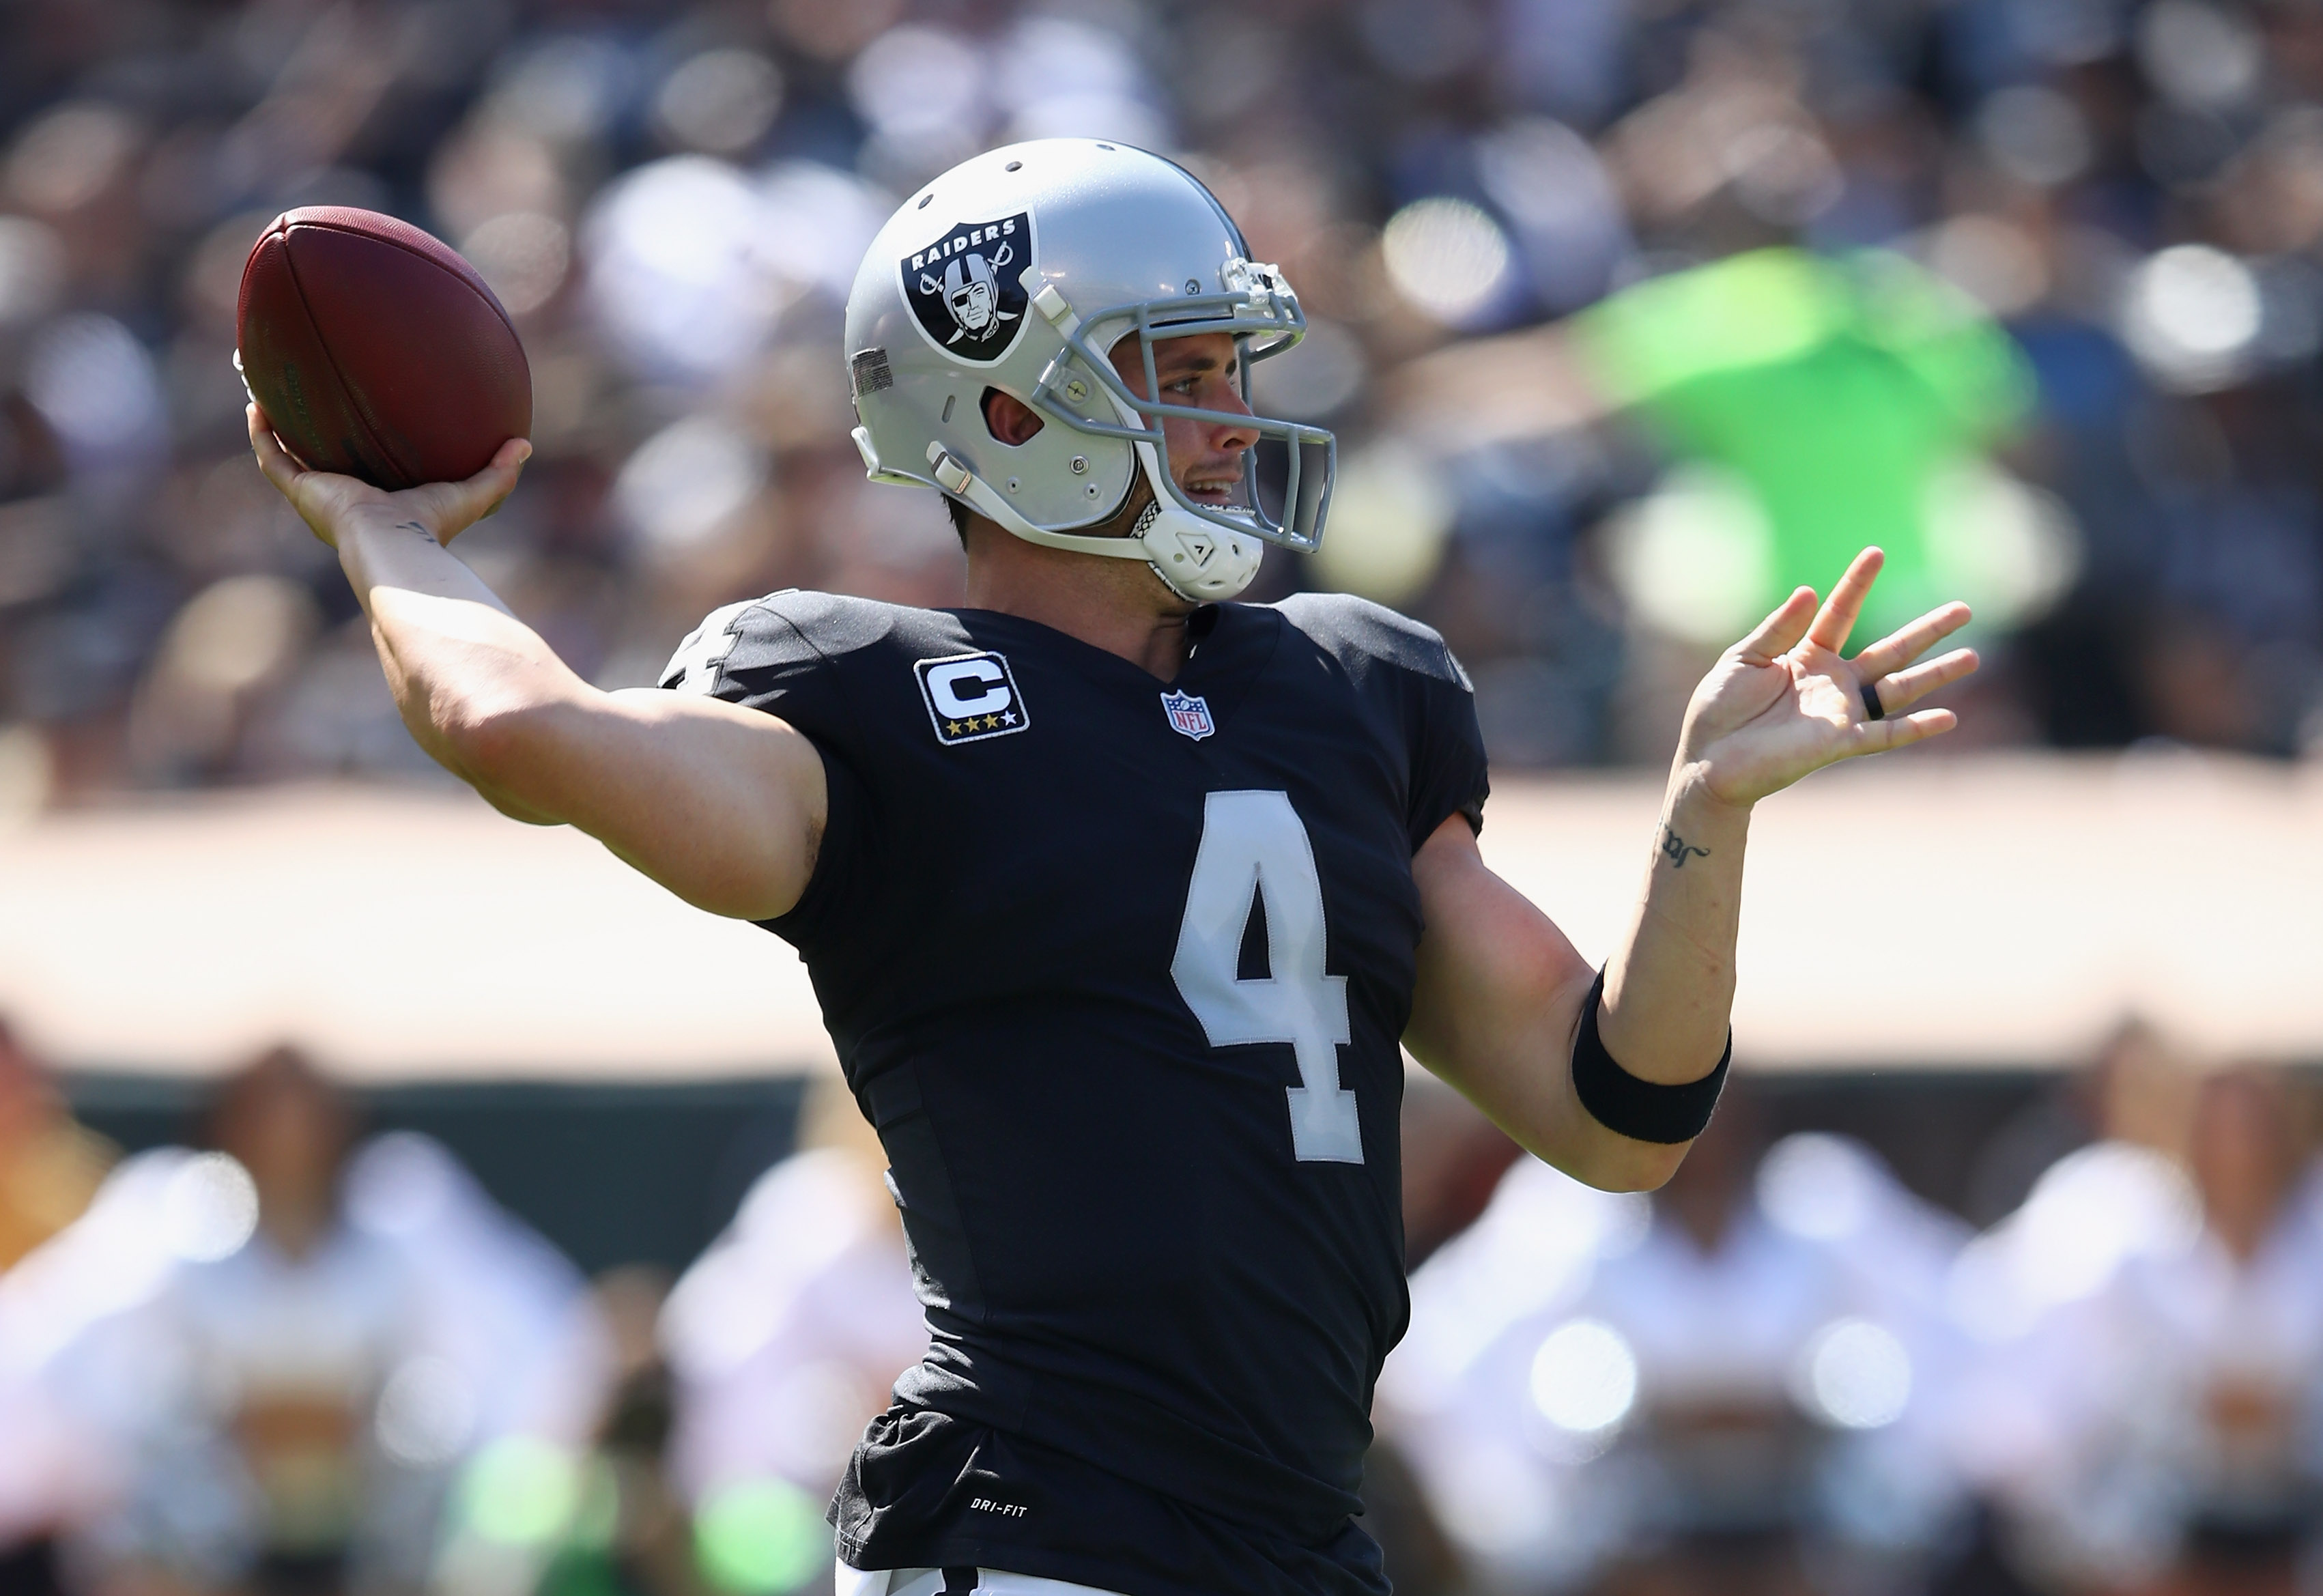 OAKLAND, CA - SEPTEMBER 17: Derek Carr #4 of the Oakland Raiders passes the ball against the New York Jets at Oakland-Alameda County Coliseum on September 17, 2017 in Oakland, California. (Photo by Ezra Shaw/Getty Images)